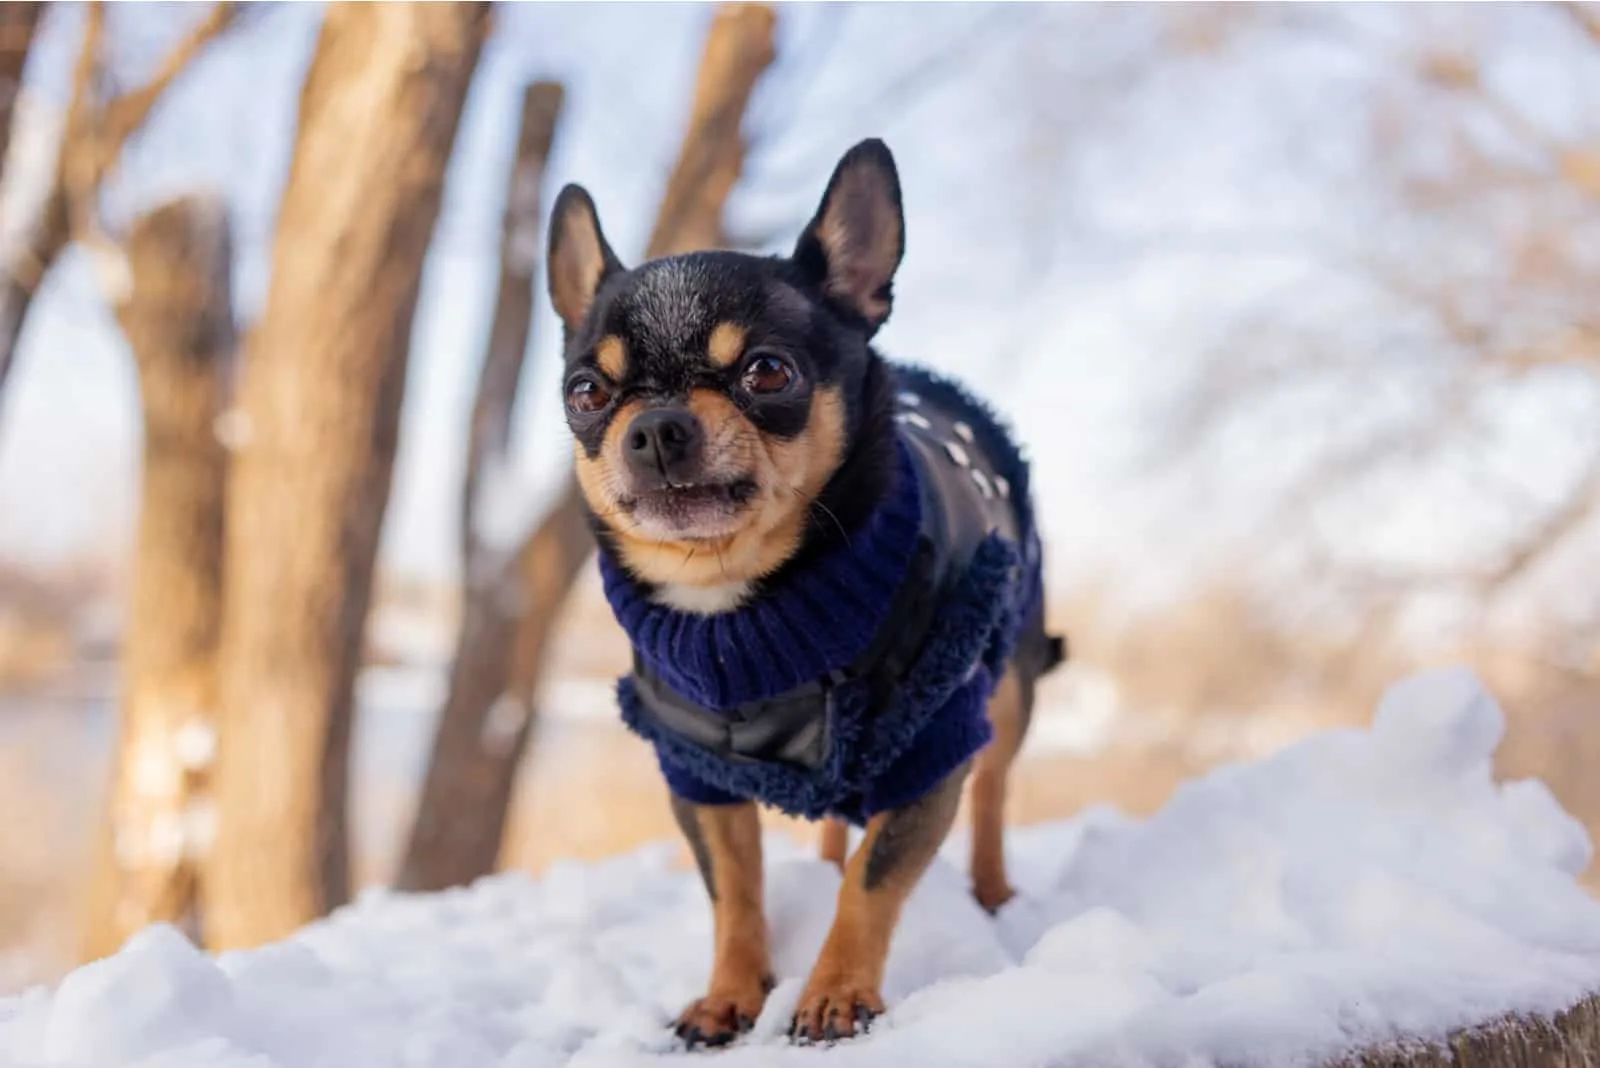 Chihuahua walking in the snow